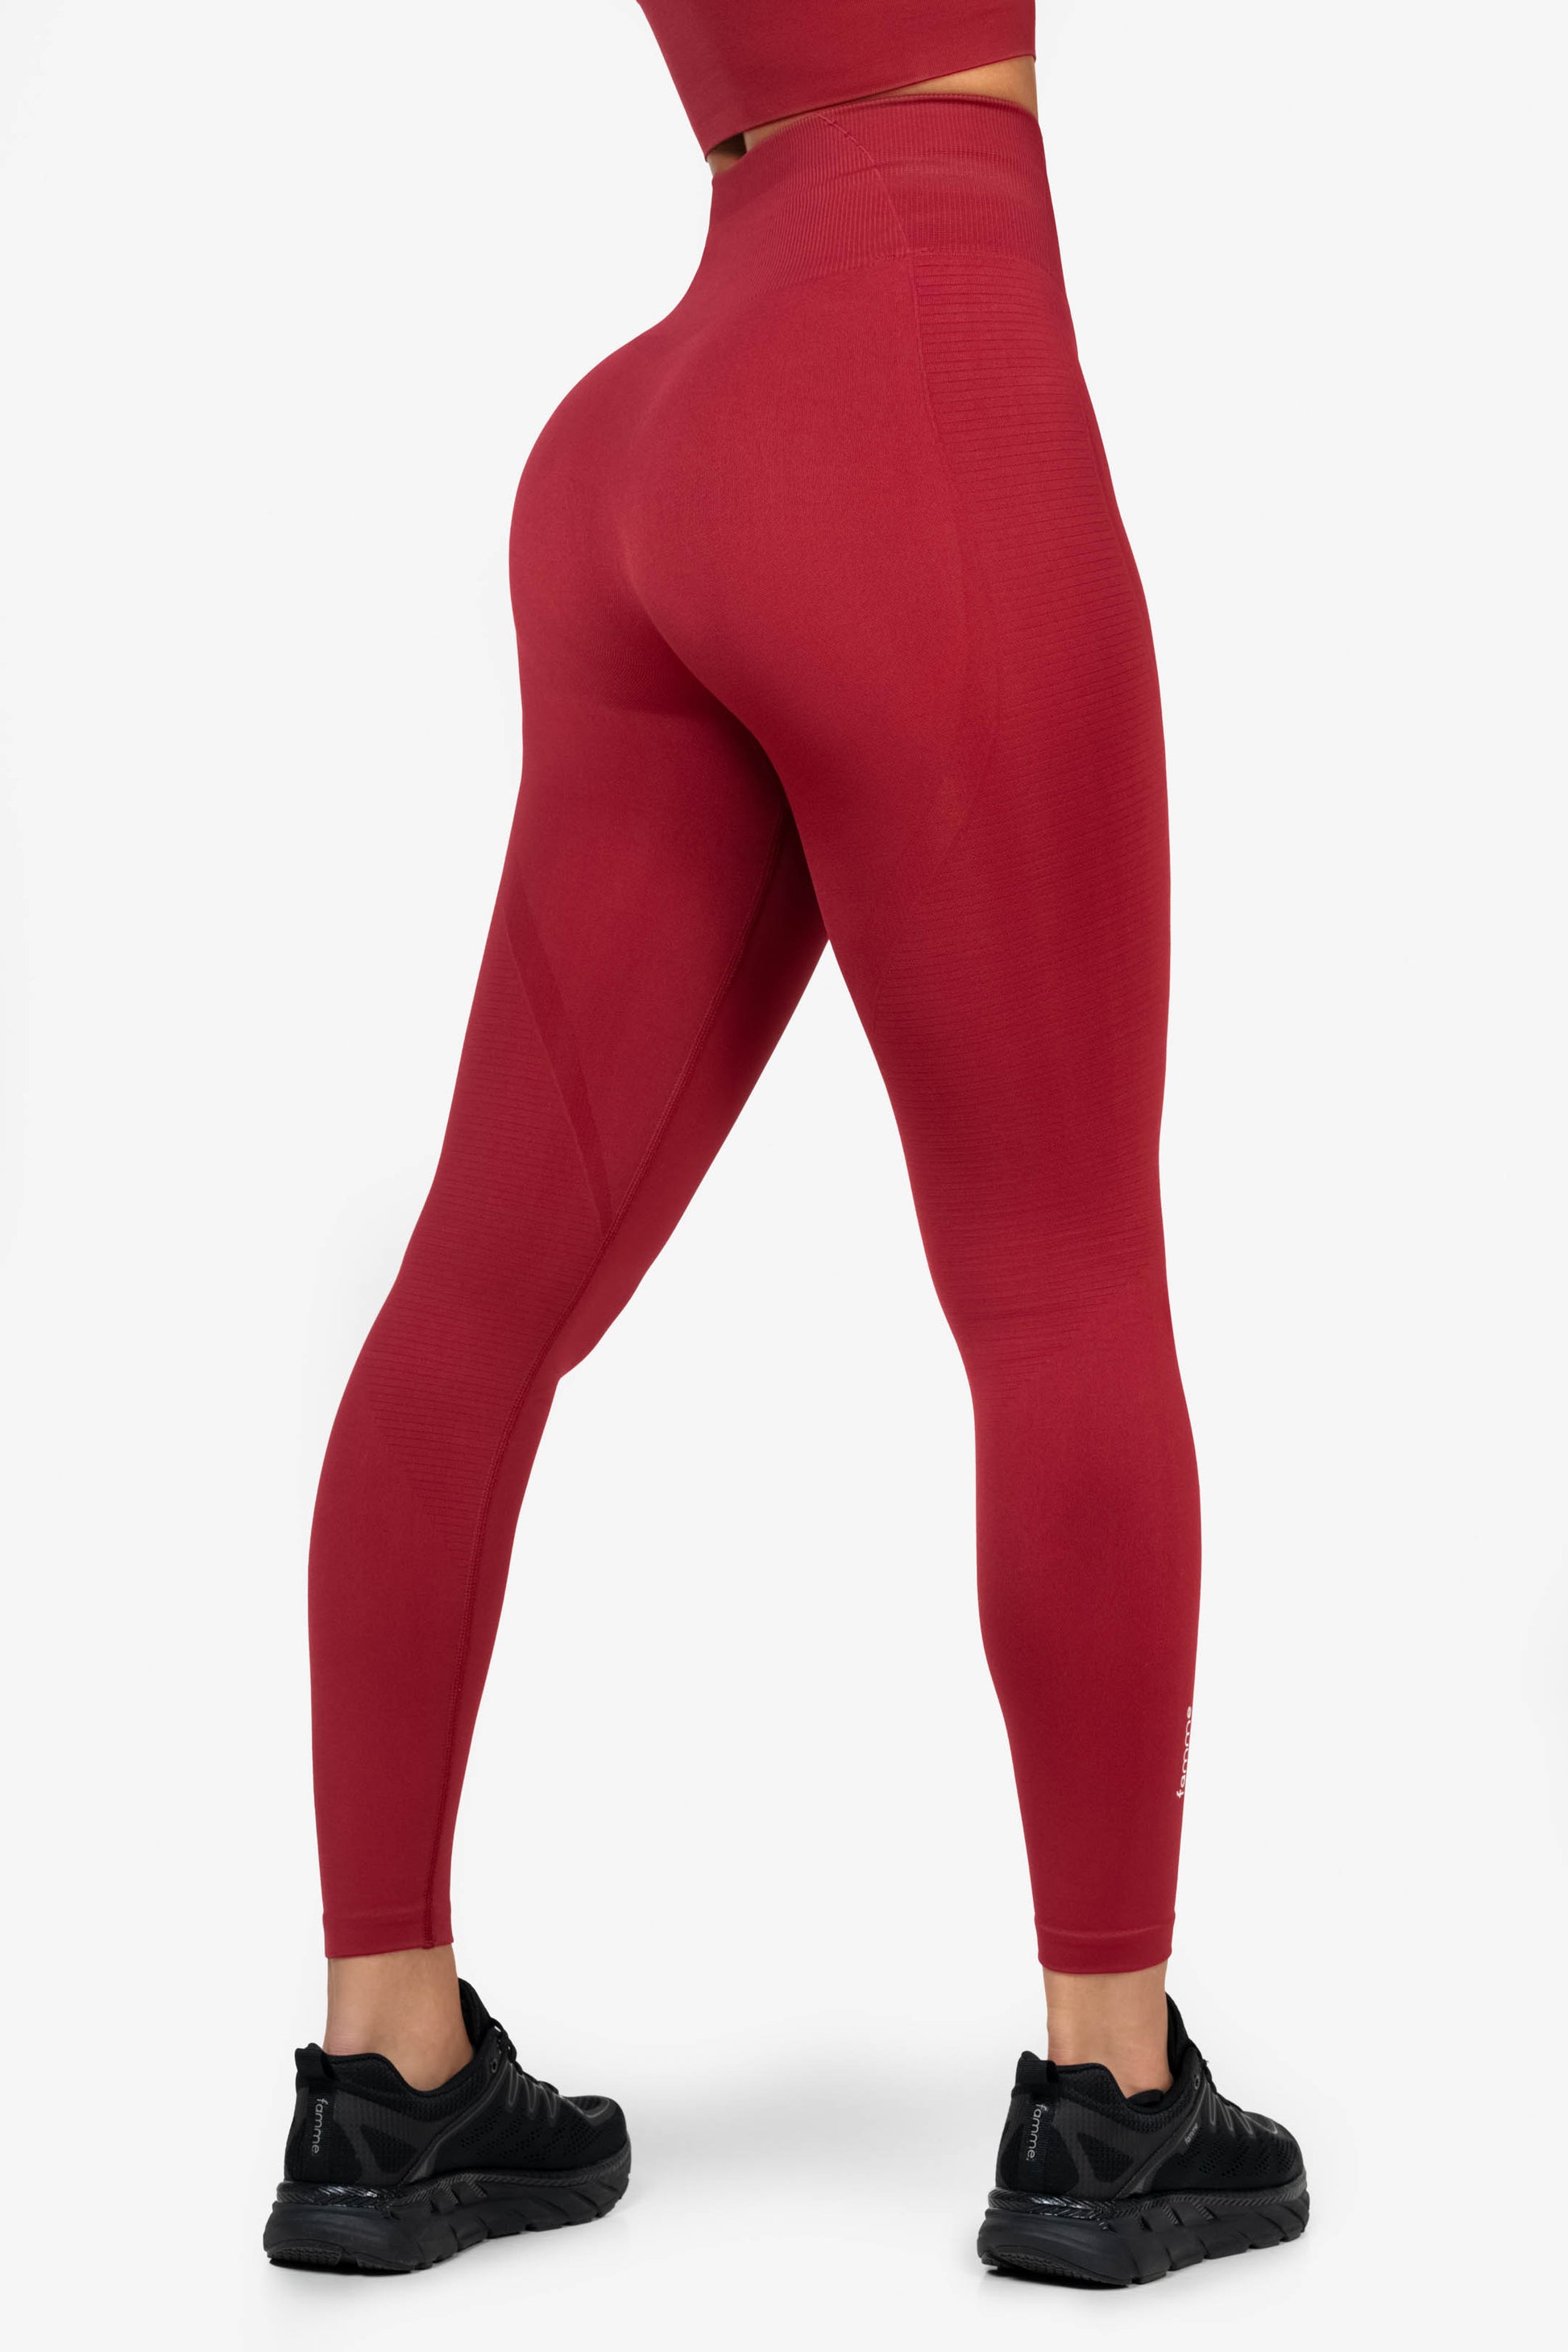 Red Vortex Tights 2 - for dame - Famme - Leggings